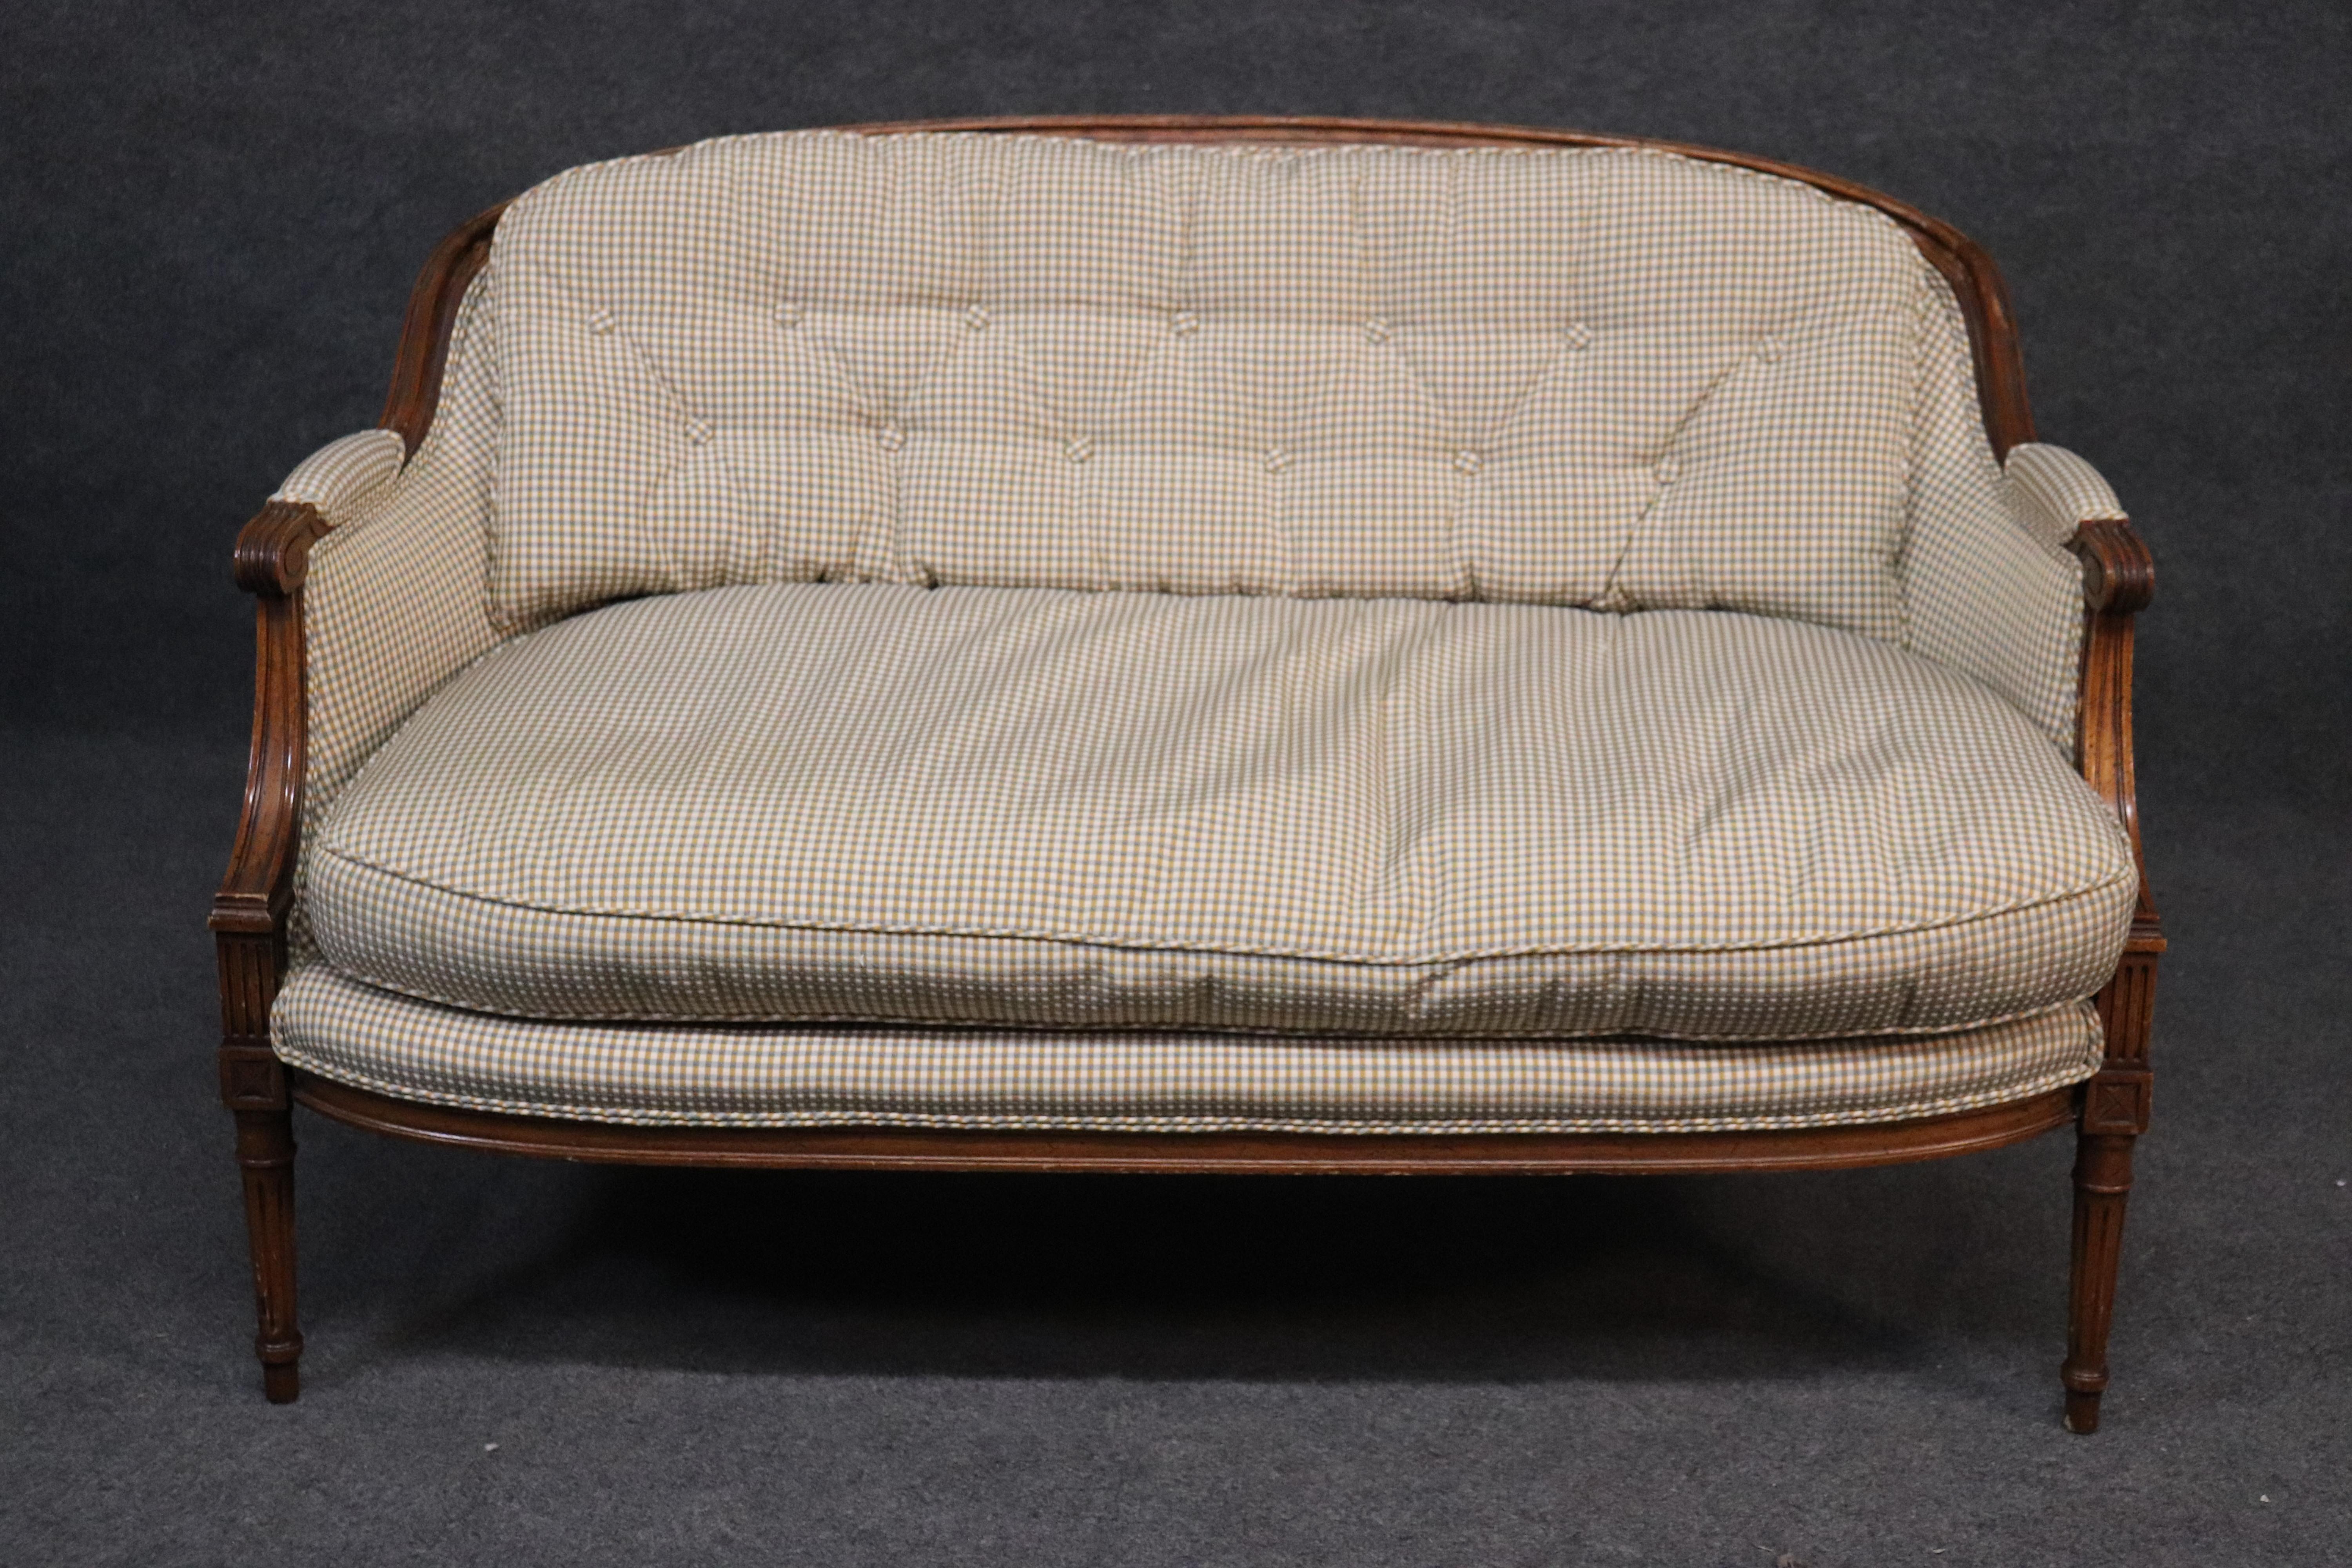 This is a gorgeous and very clean settee that has a beautiful pair of matching pillows. The settee is from the 1960s and is American made. The settee measures 52 wide x 30 deep x 32 tall and the seat height is 20 inches.